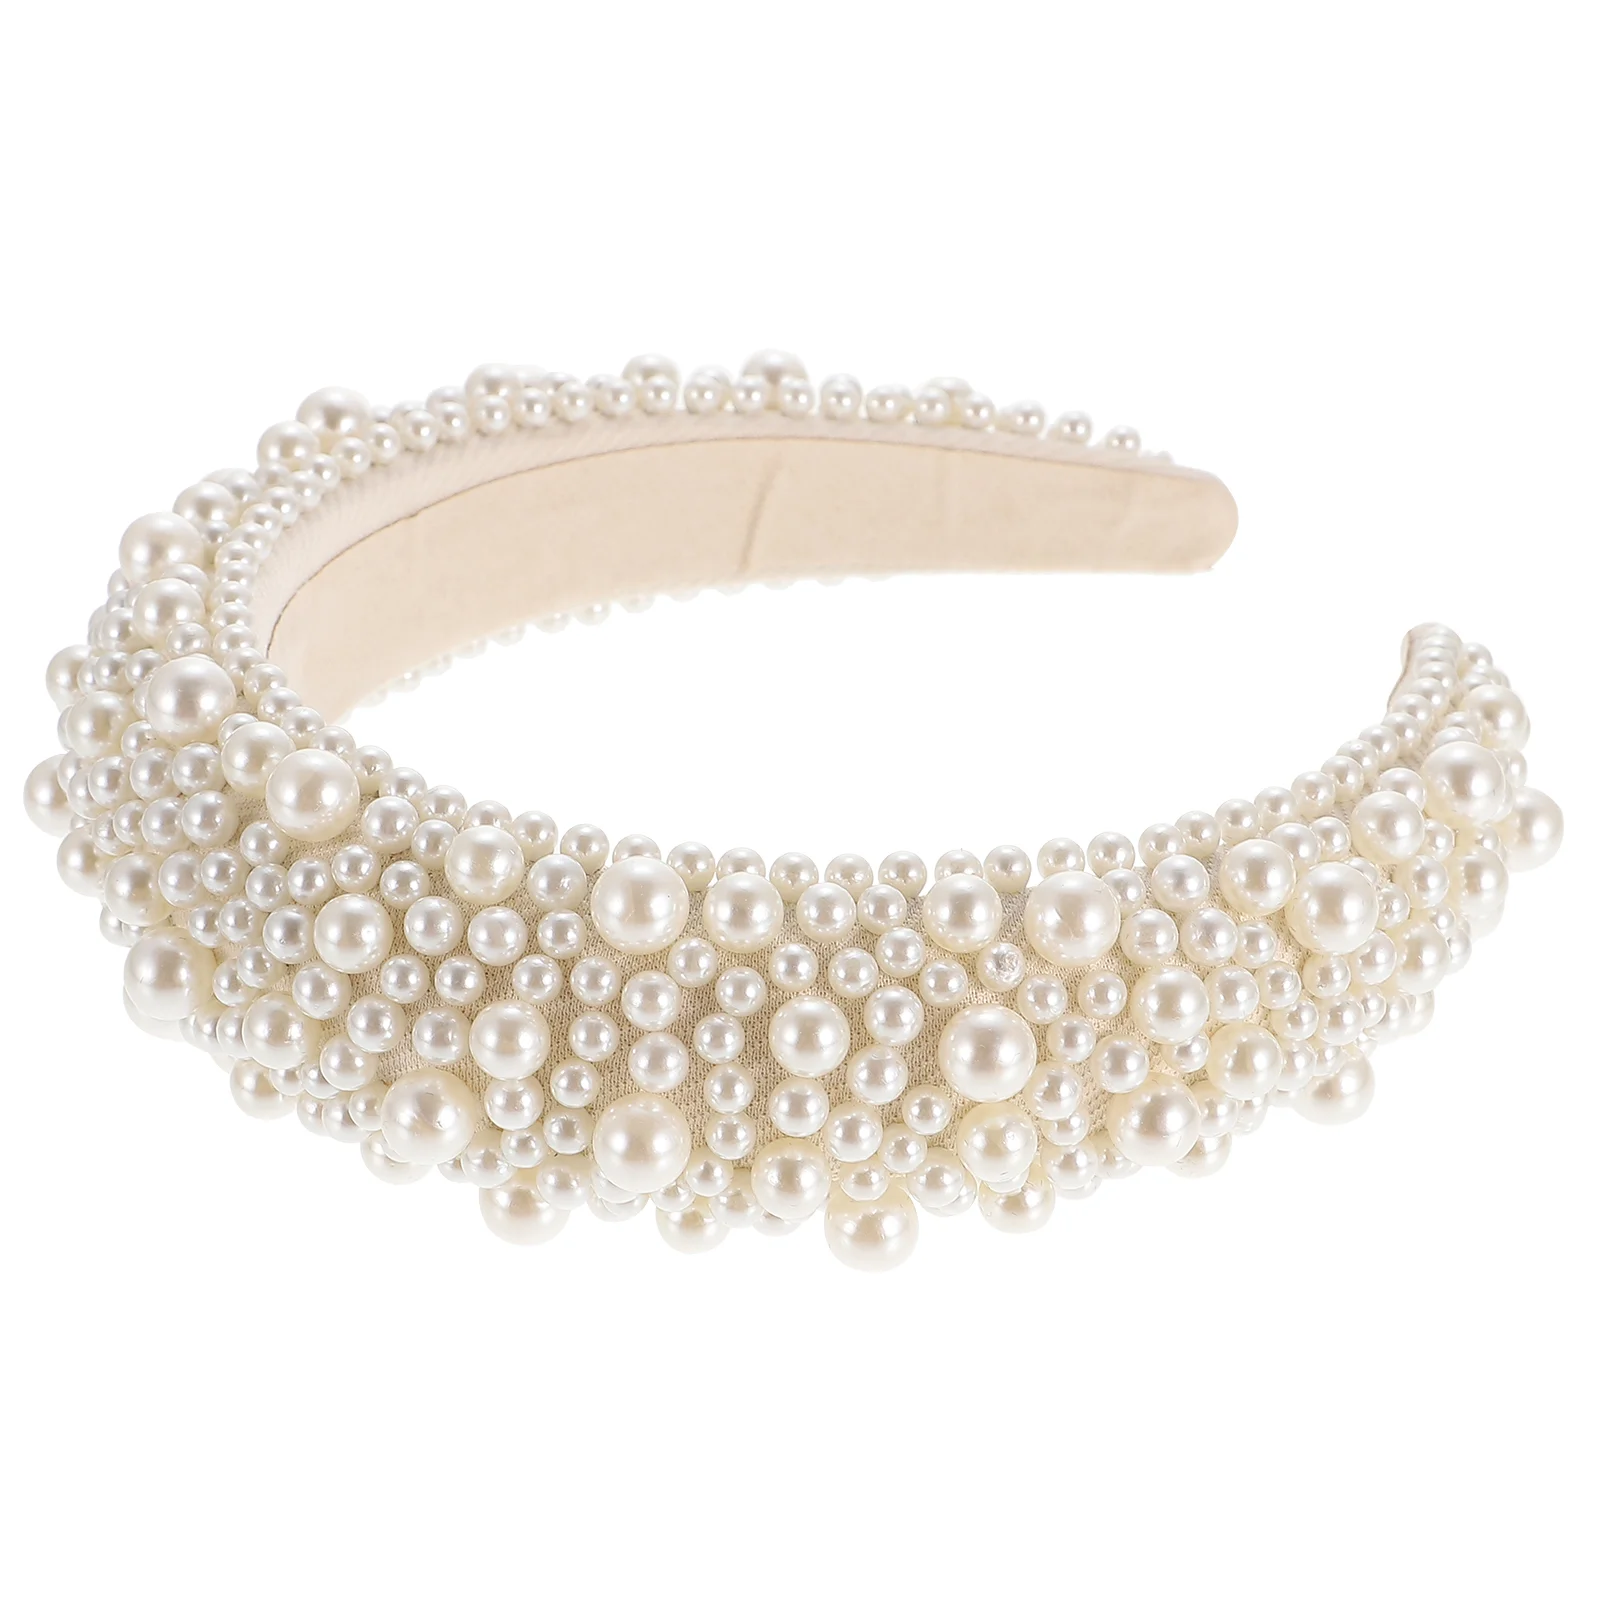 

Luxshiny Women's Fashion Headbands with Pearls, Rhinestones, and Bling String Beads